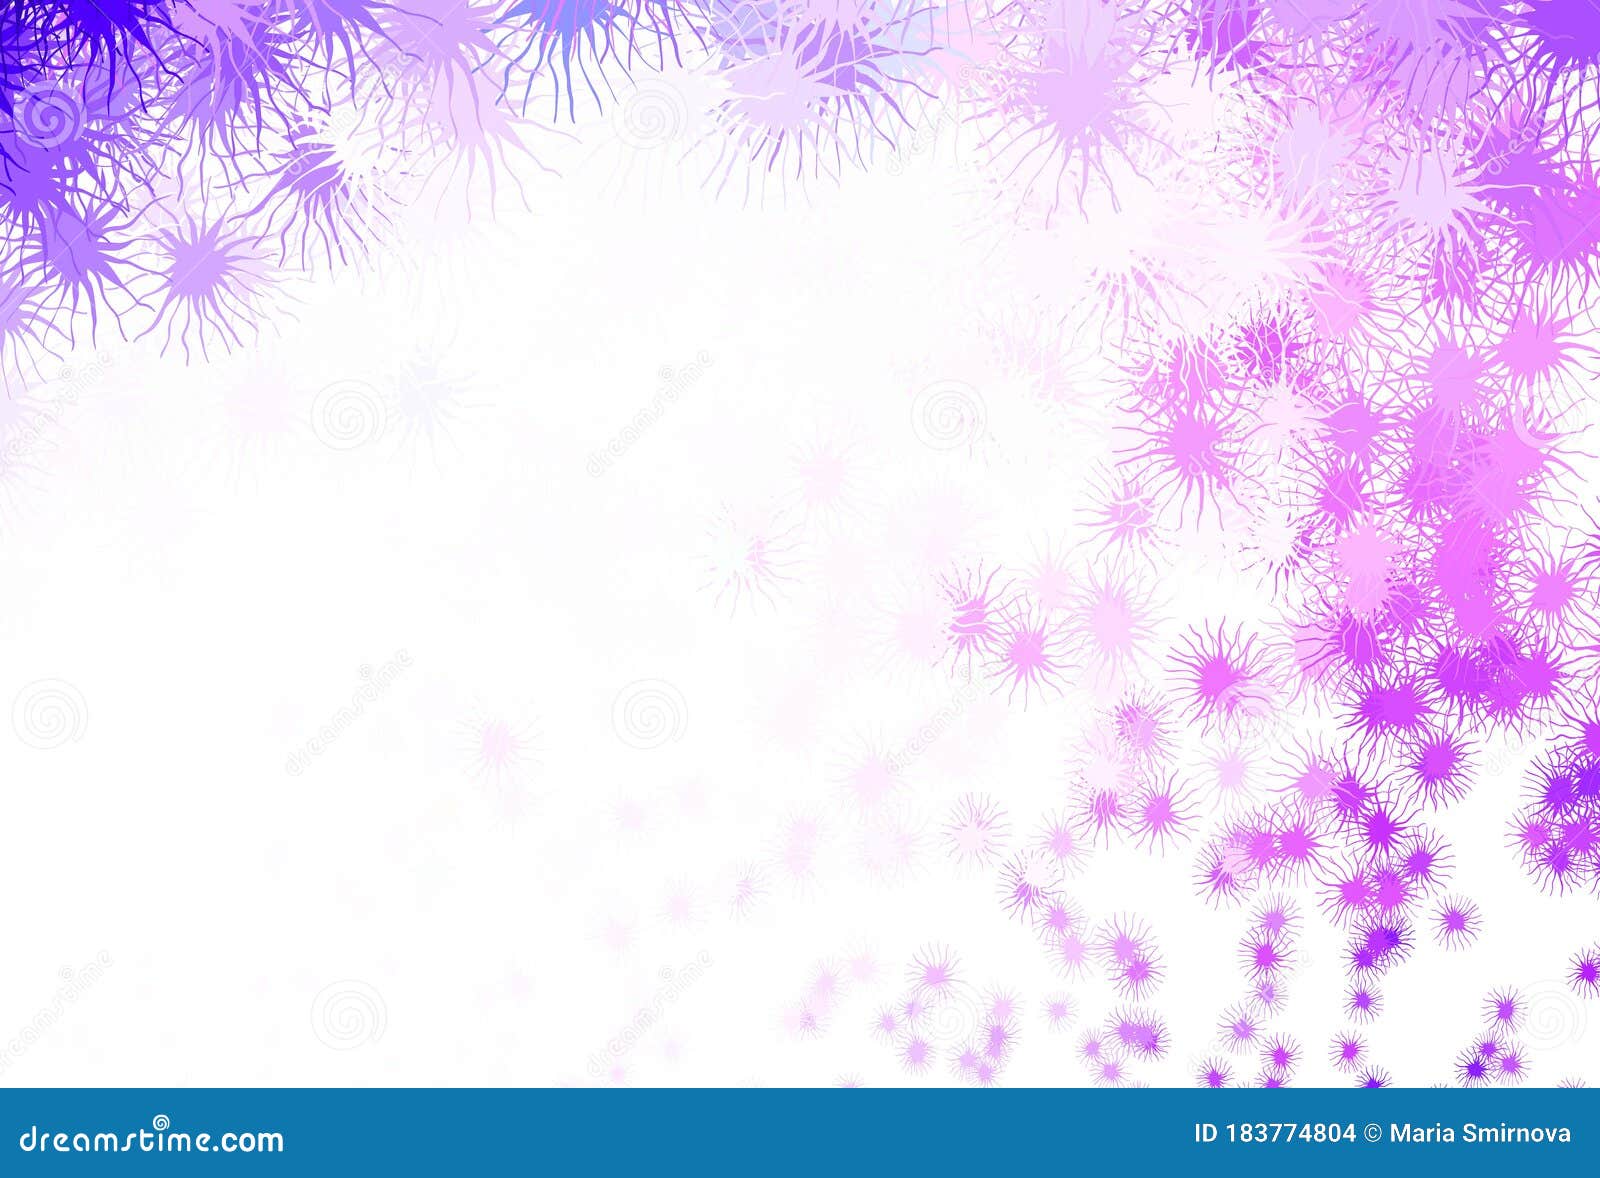 Light Purple Vector Background with Abstract Shapes. Stock Vector